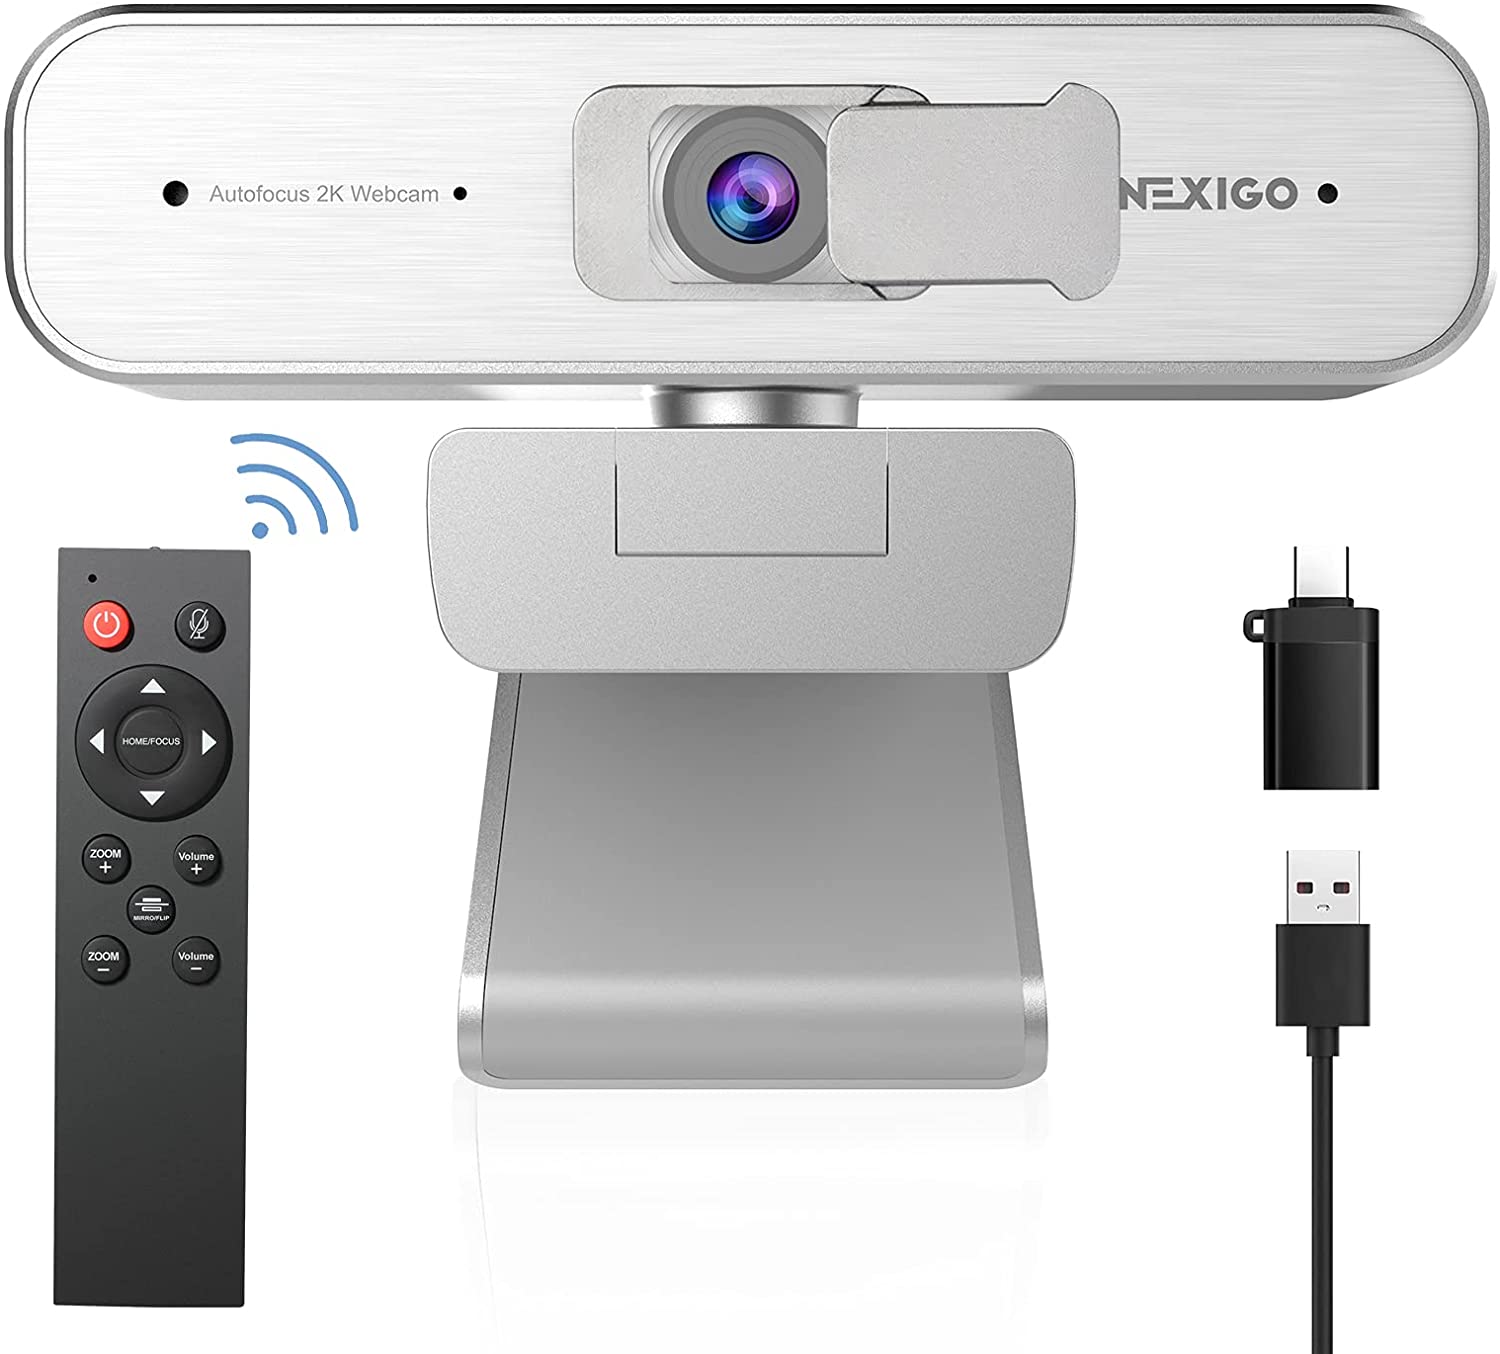 The silver NexiGo N940P can be operated with a remote control and comes with a C to A adapter.